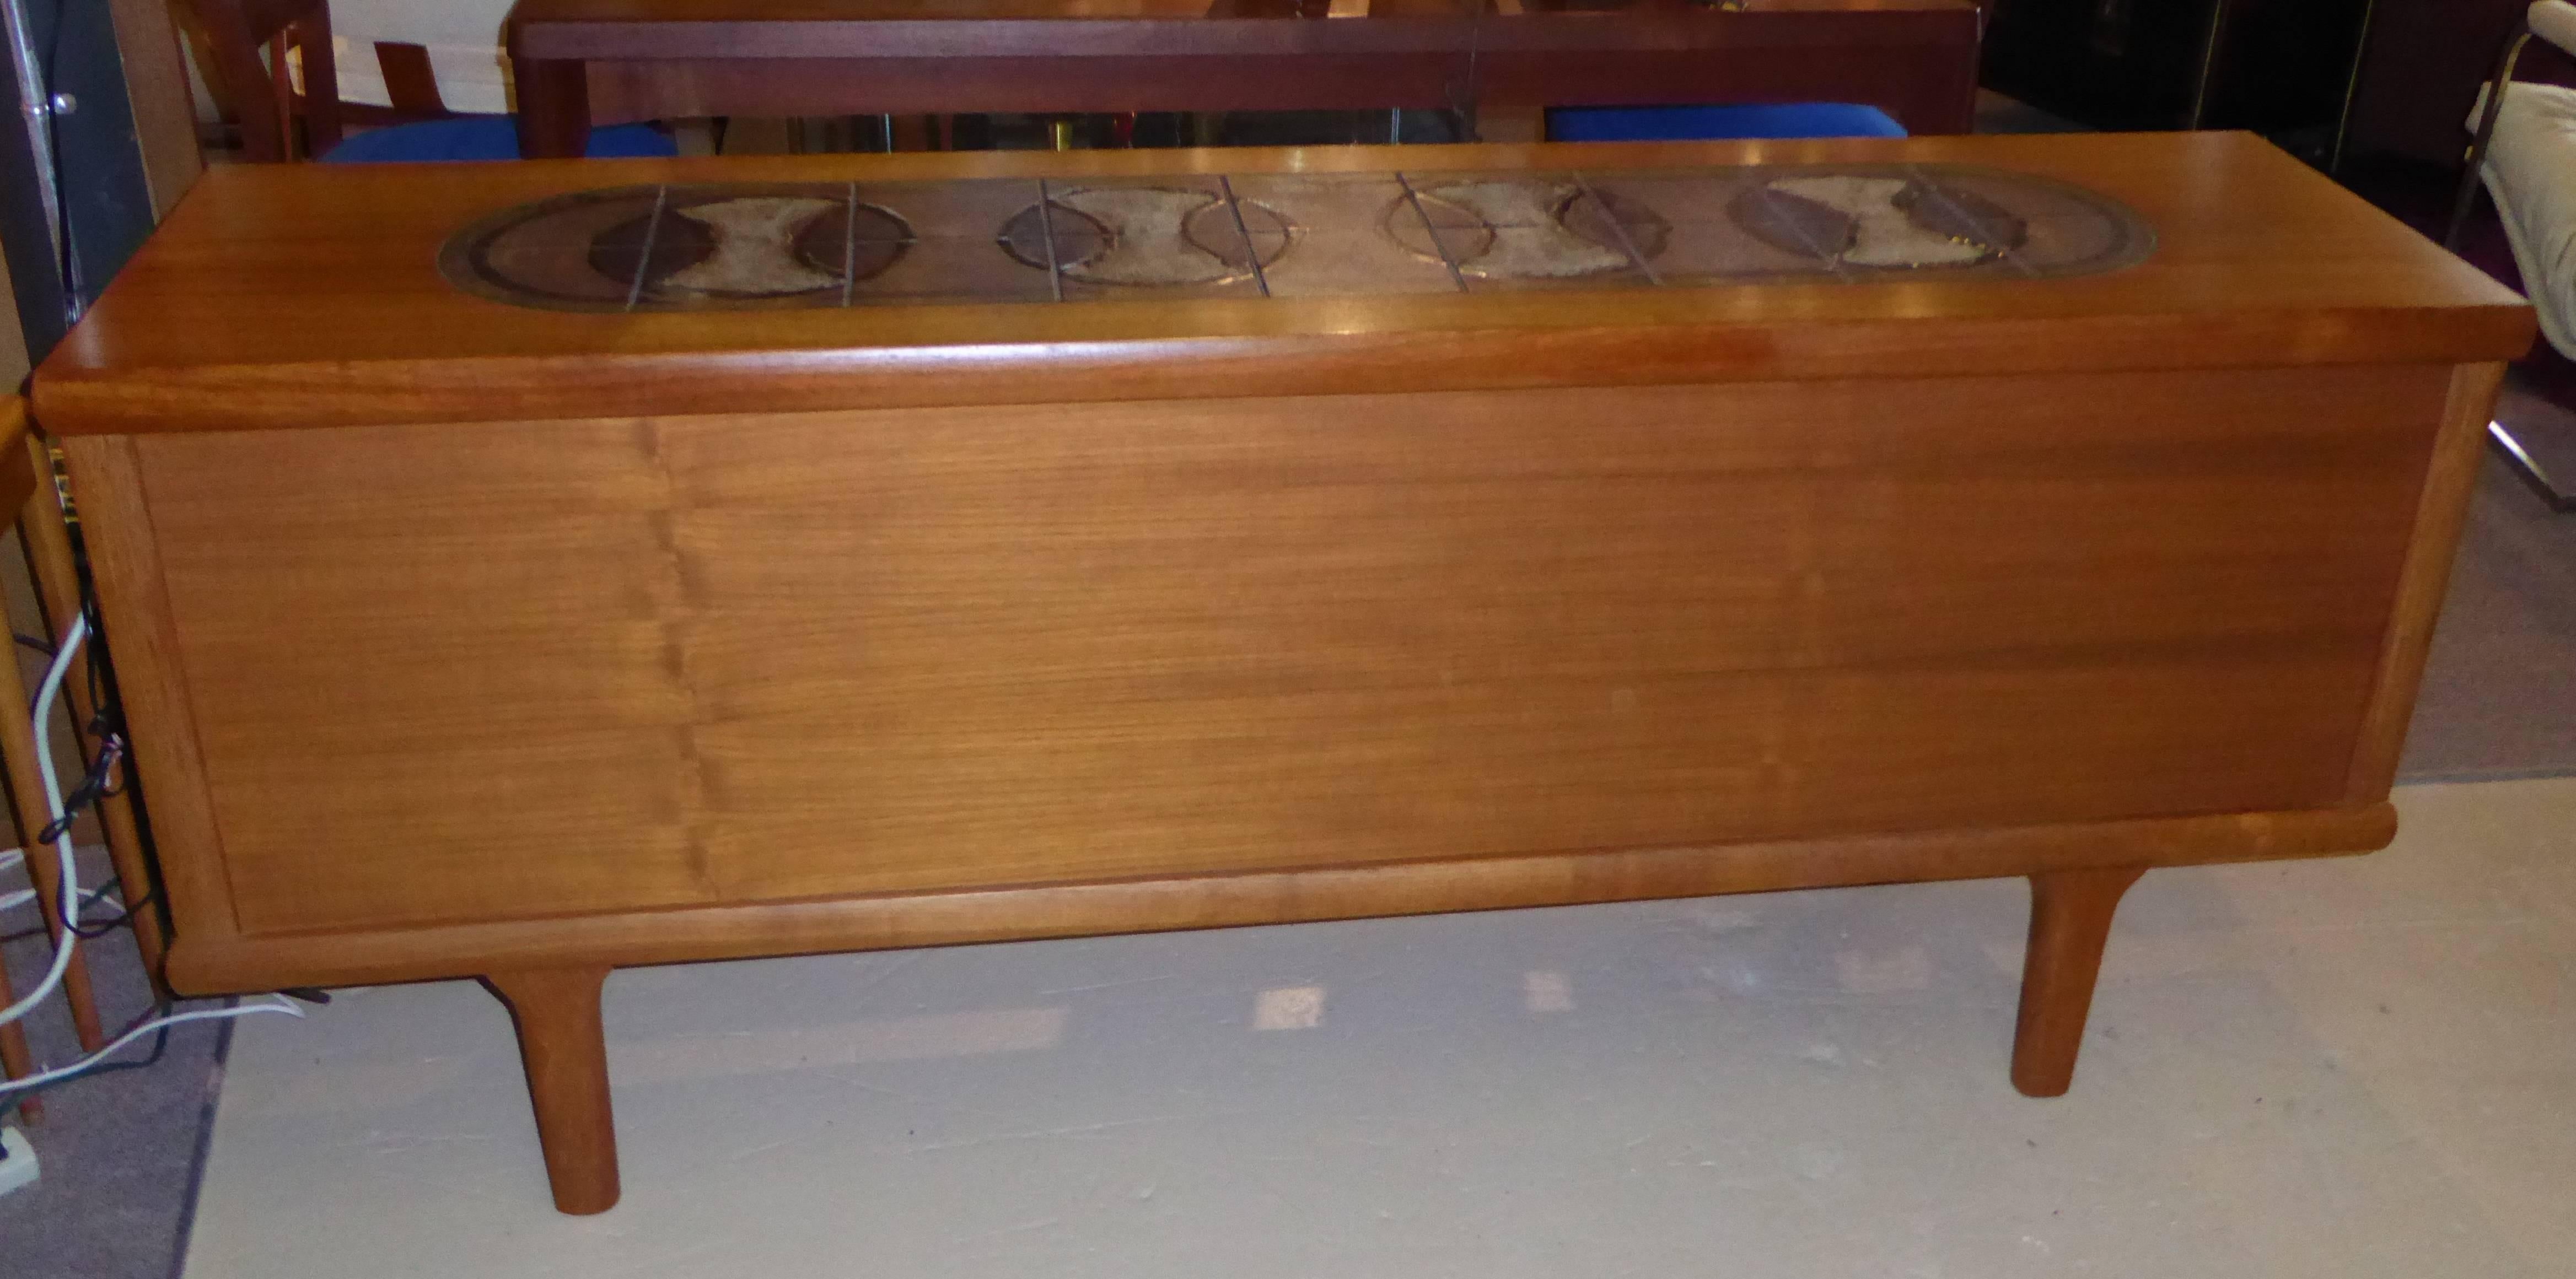 1960s Danish teak sideboard Credenza with inset signed tile top featuring three center drawers, the top drawer felt lined and sliding doors left and right opening to shelved interior storage.
In very good original condition with some scratches